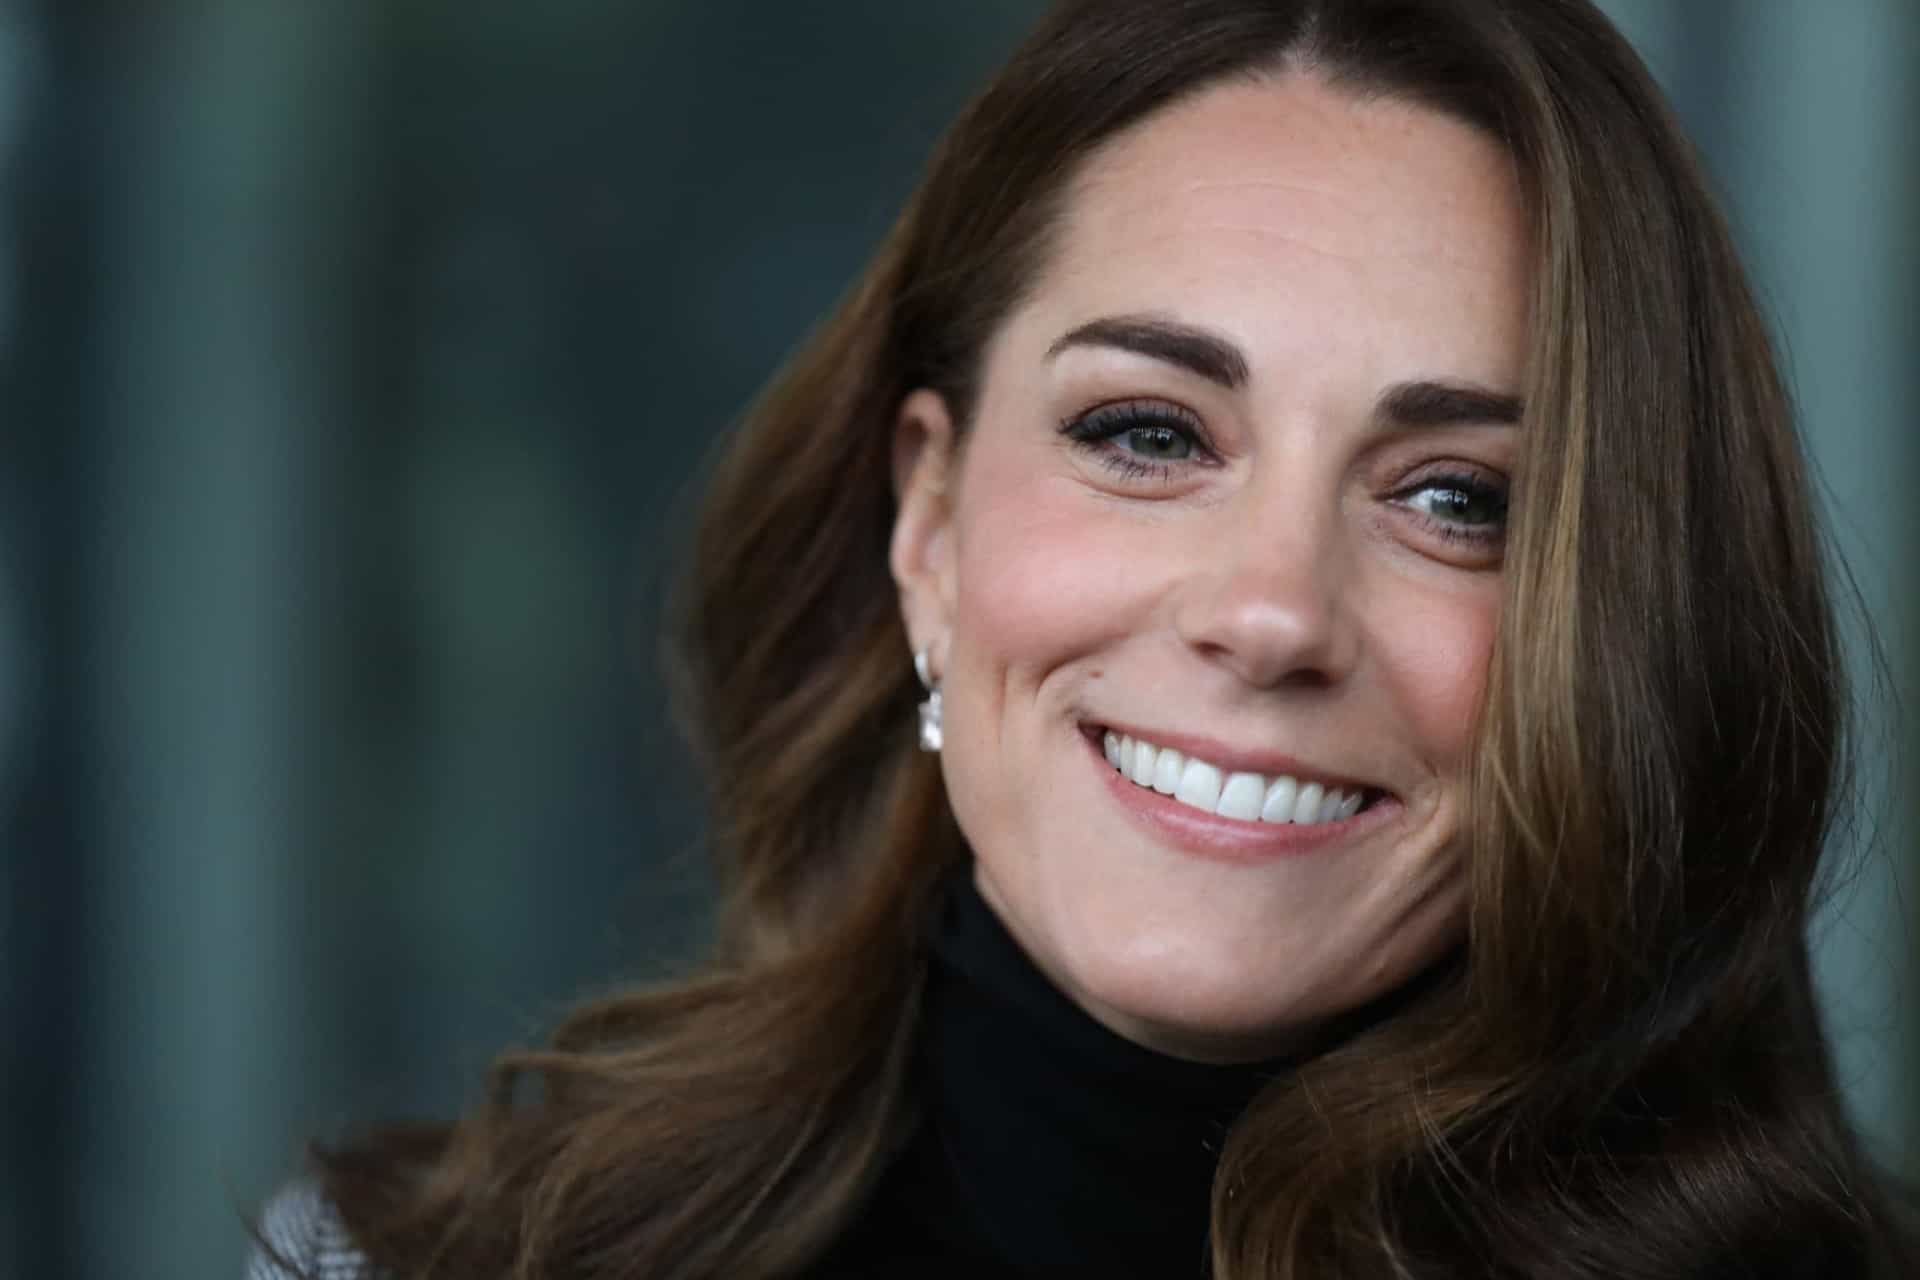 <p>Formerly the Duchess of Cambridge, Kate became the Princess of Wales upon her father-in-law's accession to the throne, after the death of Queen Elizabeth II.</p><p>You may also like:<a href="https://www.starsinsider.com/n/501138?utm_source=msn.com&utm_medium=display&utm_campaign=referral_description&utm_content=517522en-us"> The best hobby for you based on your zodiac sign</a></p>